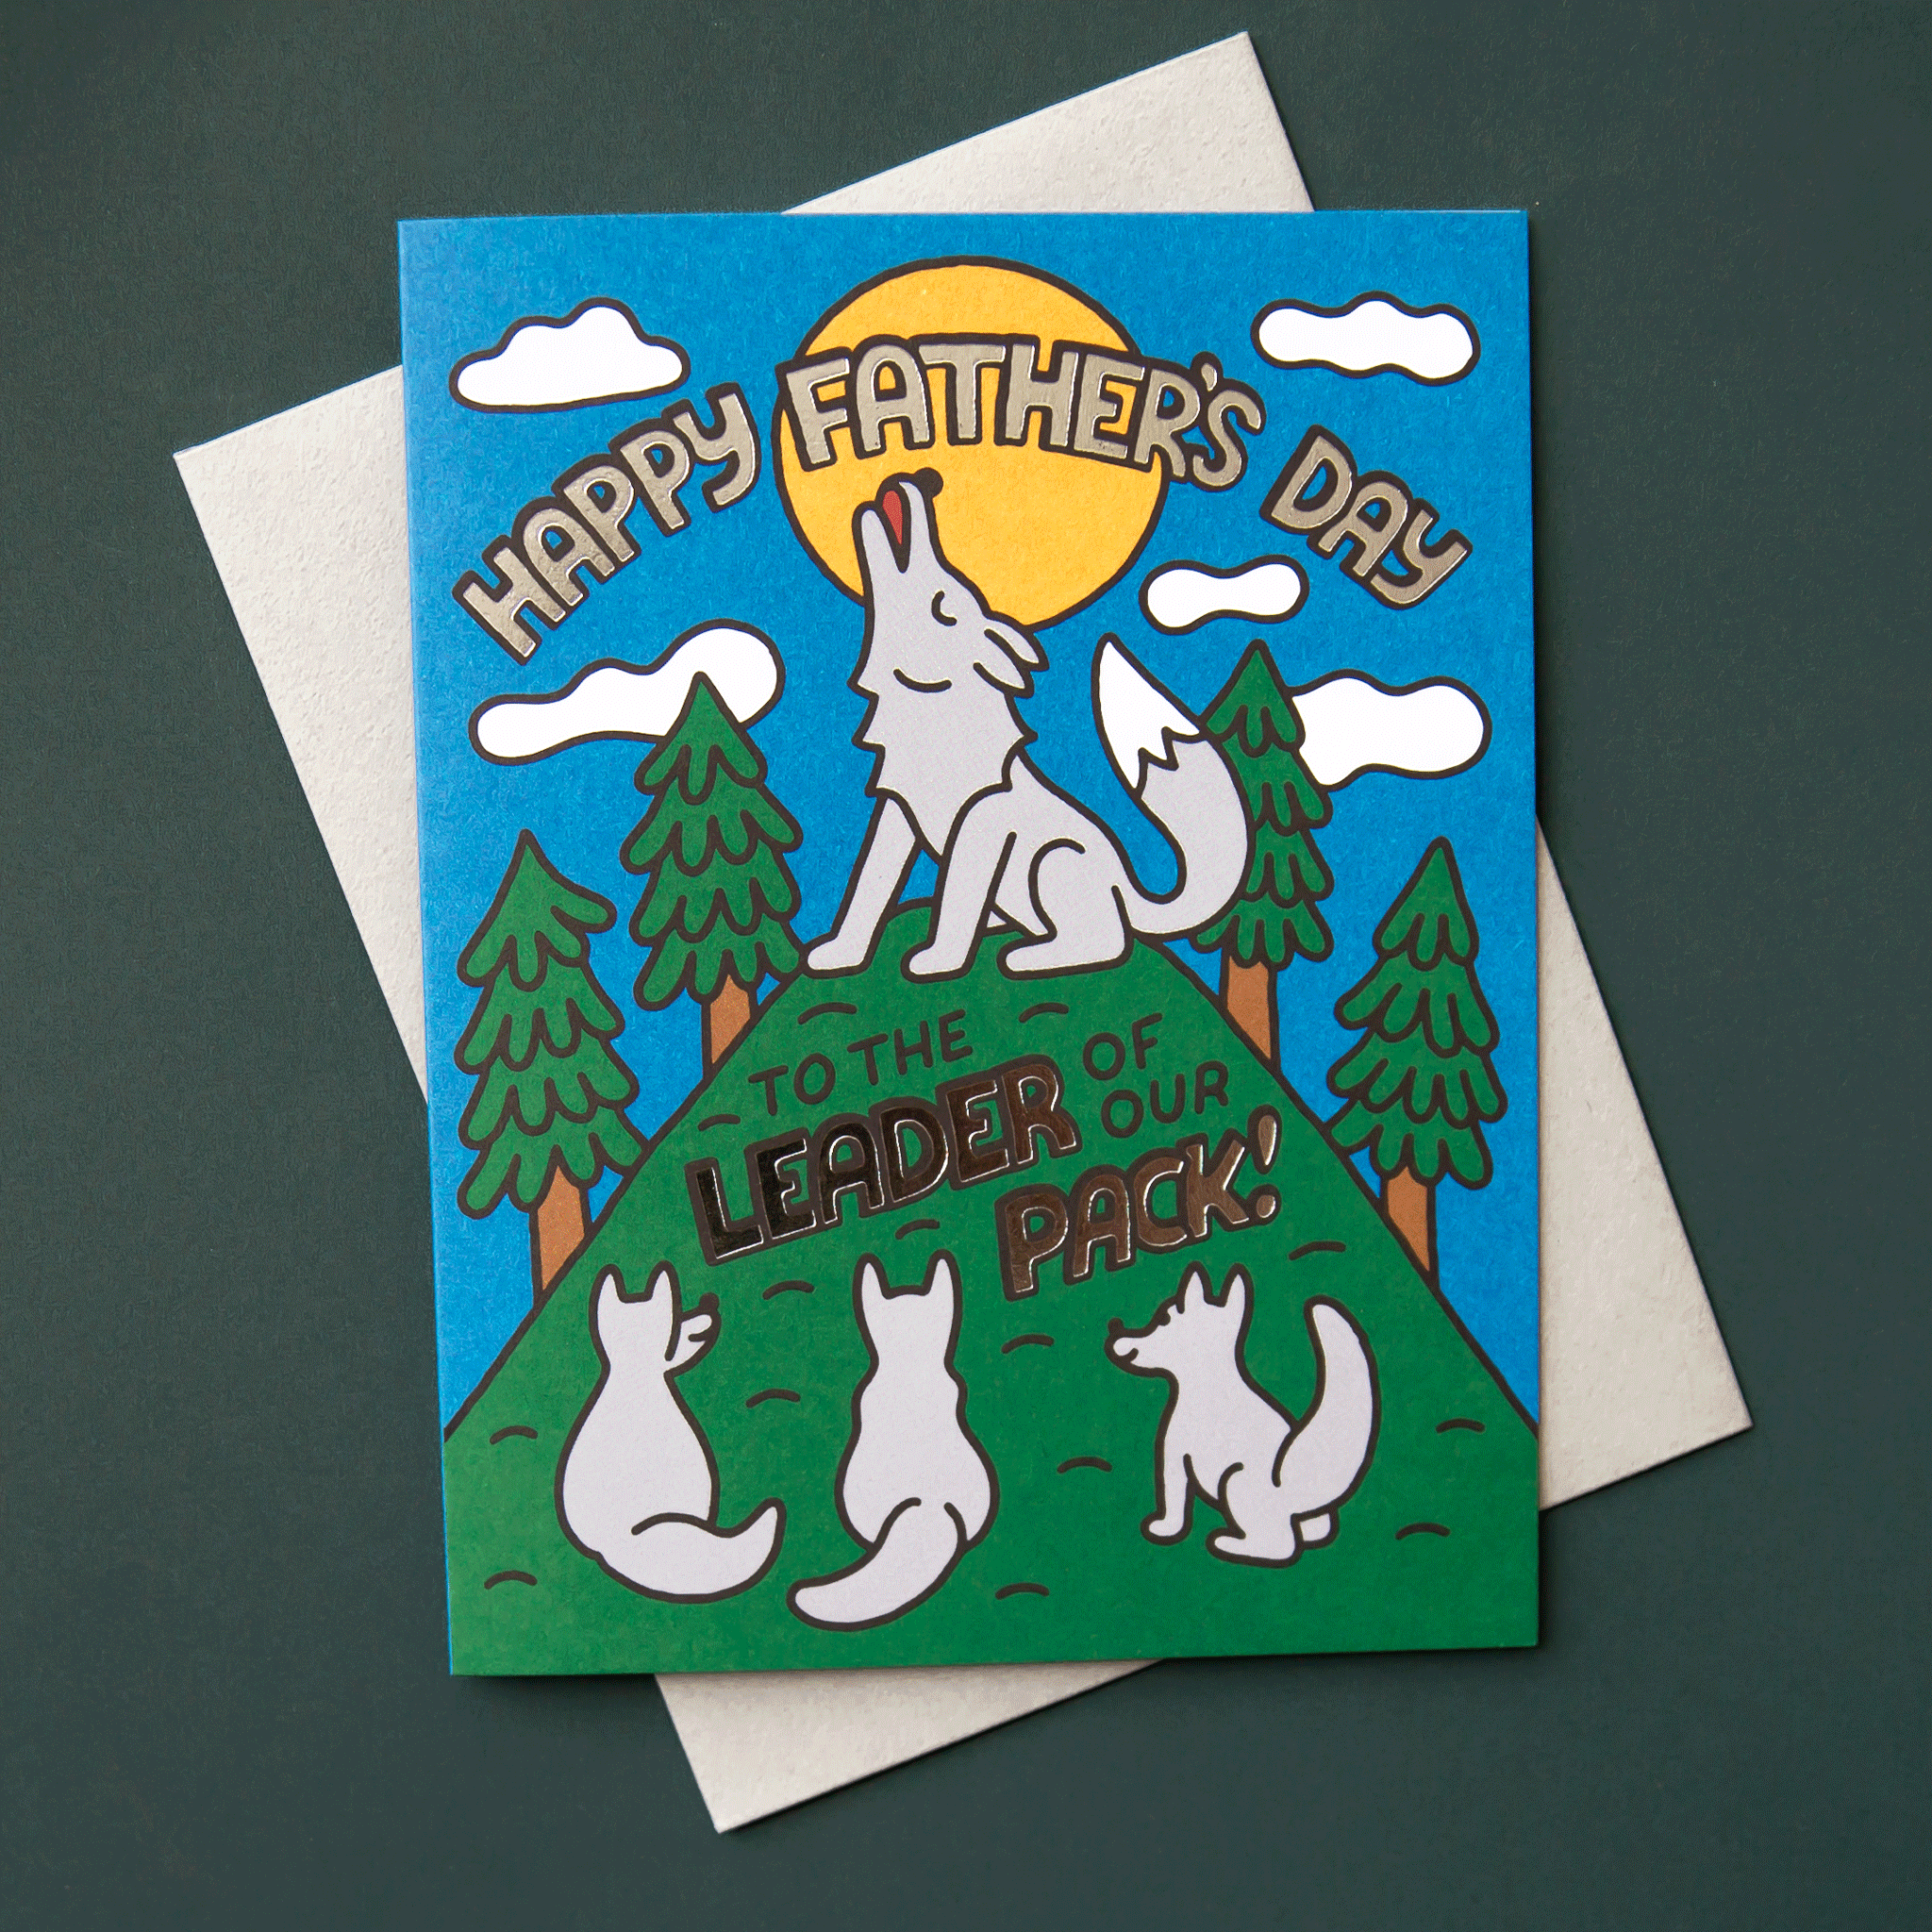 On a dark green background is a blue and green card featuring a graphic of a wolf on top of a hill howling while the pup wolfs are looking up from the bottom and text that reads, "Happy Father's Day To The Leader Of Our Pack!".